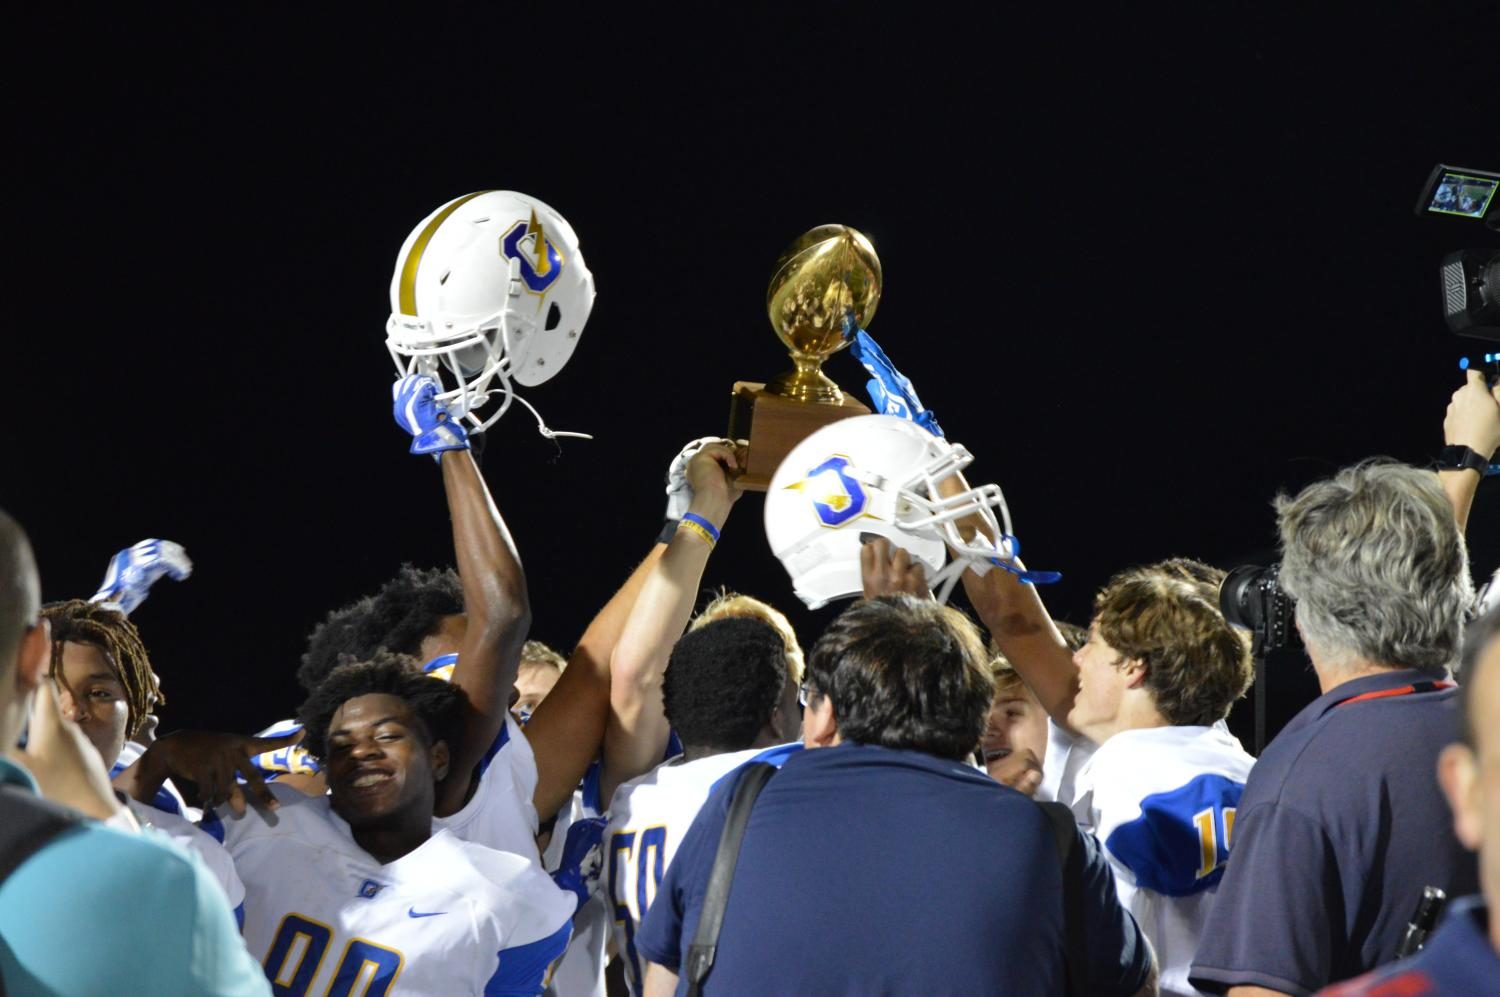 The+Chargers+hoist+the+Crosstown+Classic+Trophy+following+the+Oxfords+41-17+win+over+Lafayette.